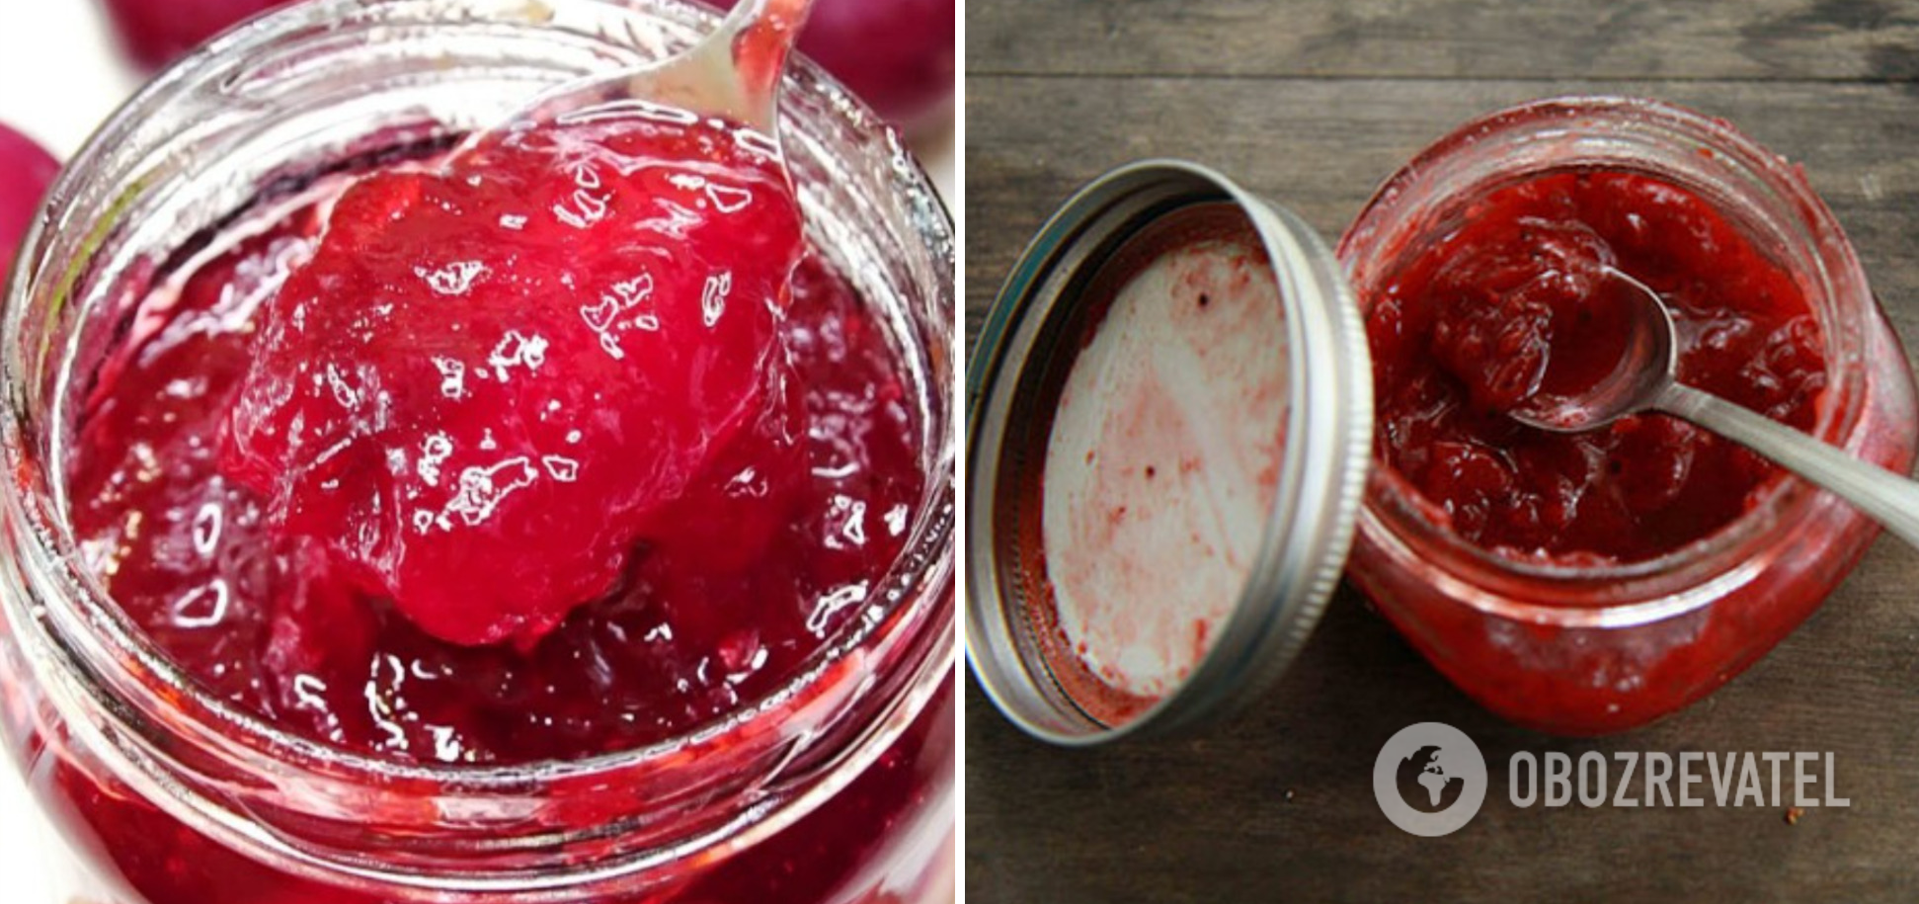 Why does jam go stale in a jar